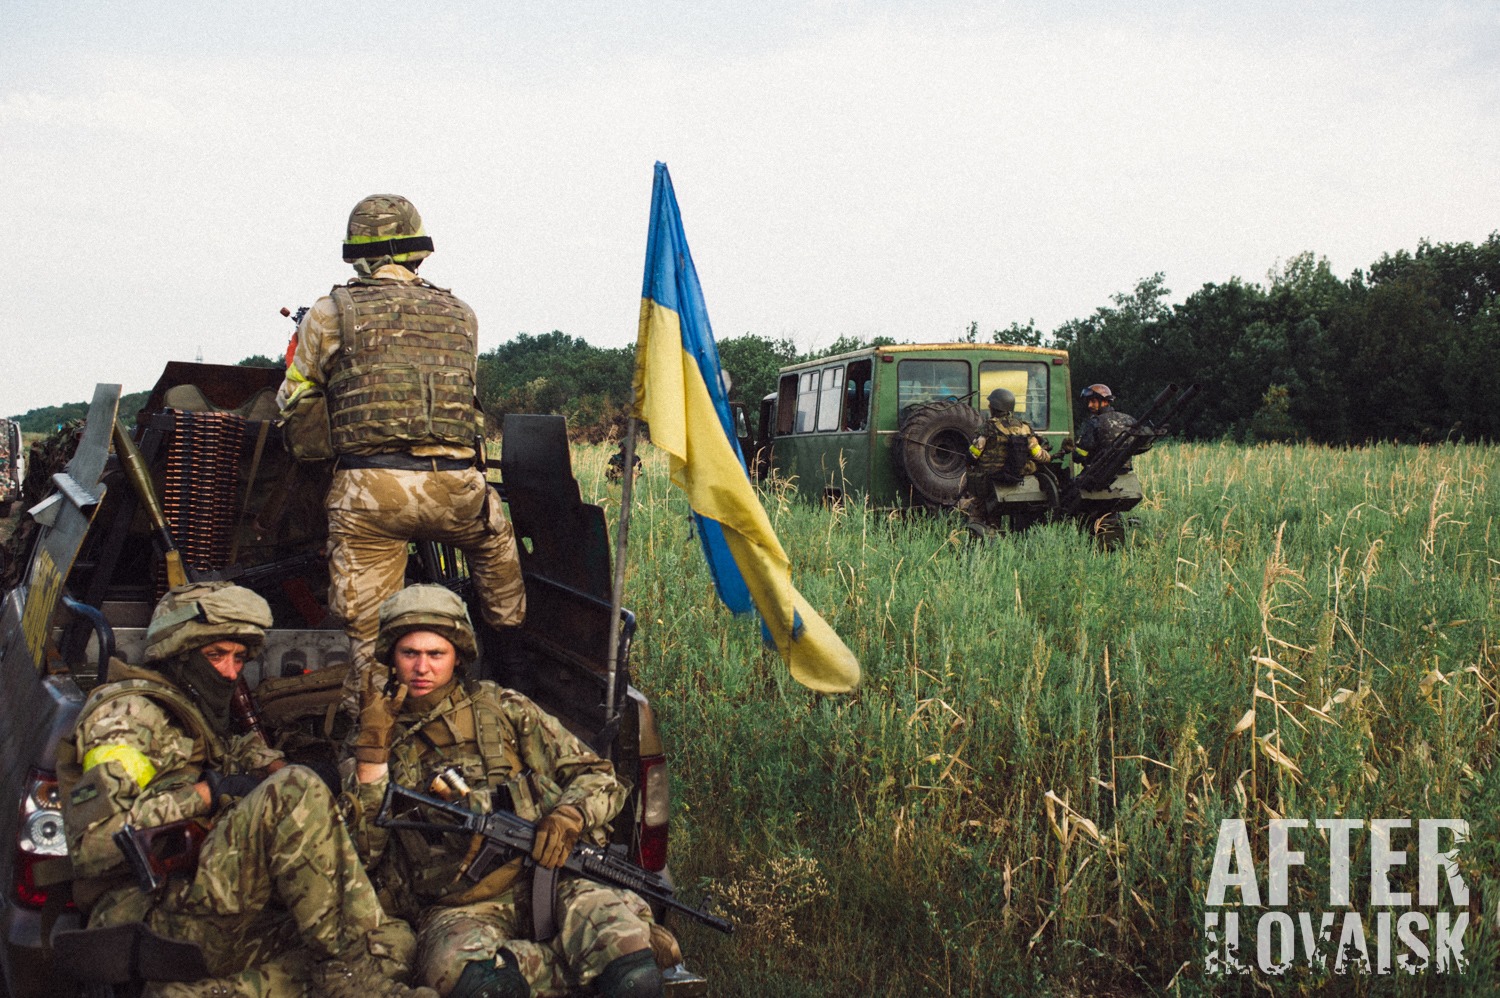 Ukraine provides evidence of Russian aggression in Ilovaisk, but Ukrainian command’s responsibility hushed up